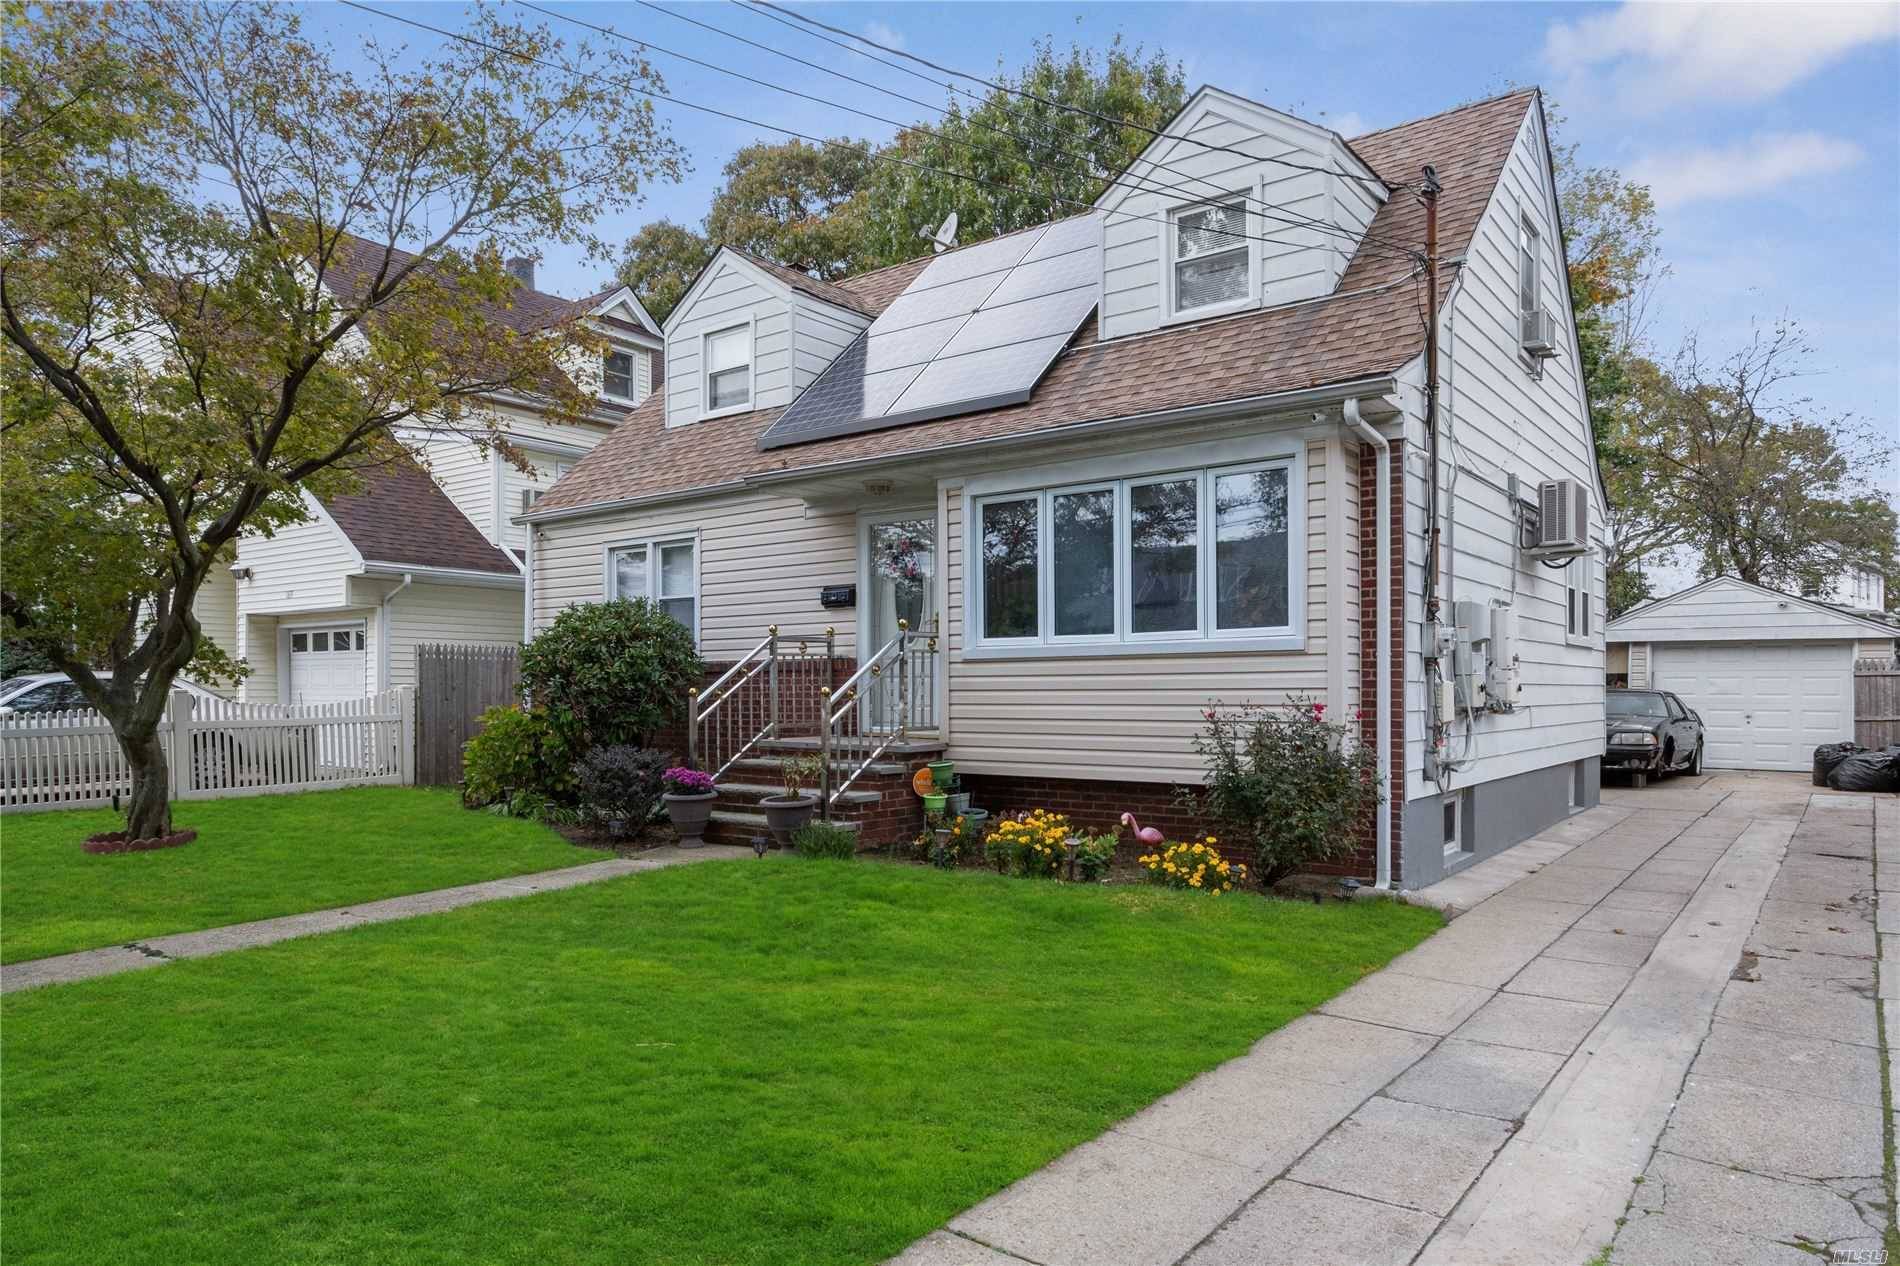 Great opportunity to own a beautiful cape style home, ideally located near shopping, major roadways and LIRR for easy commutes.